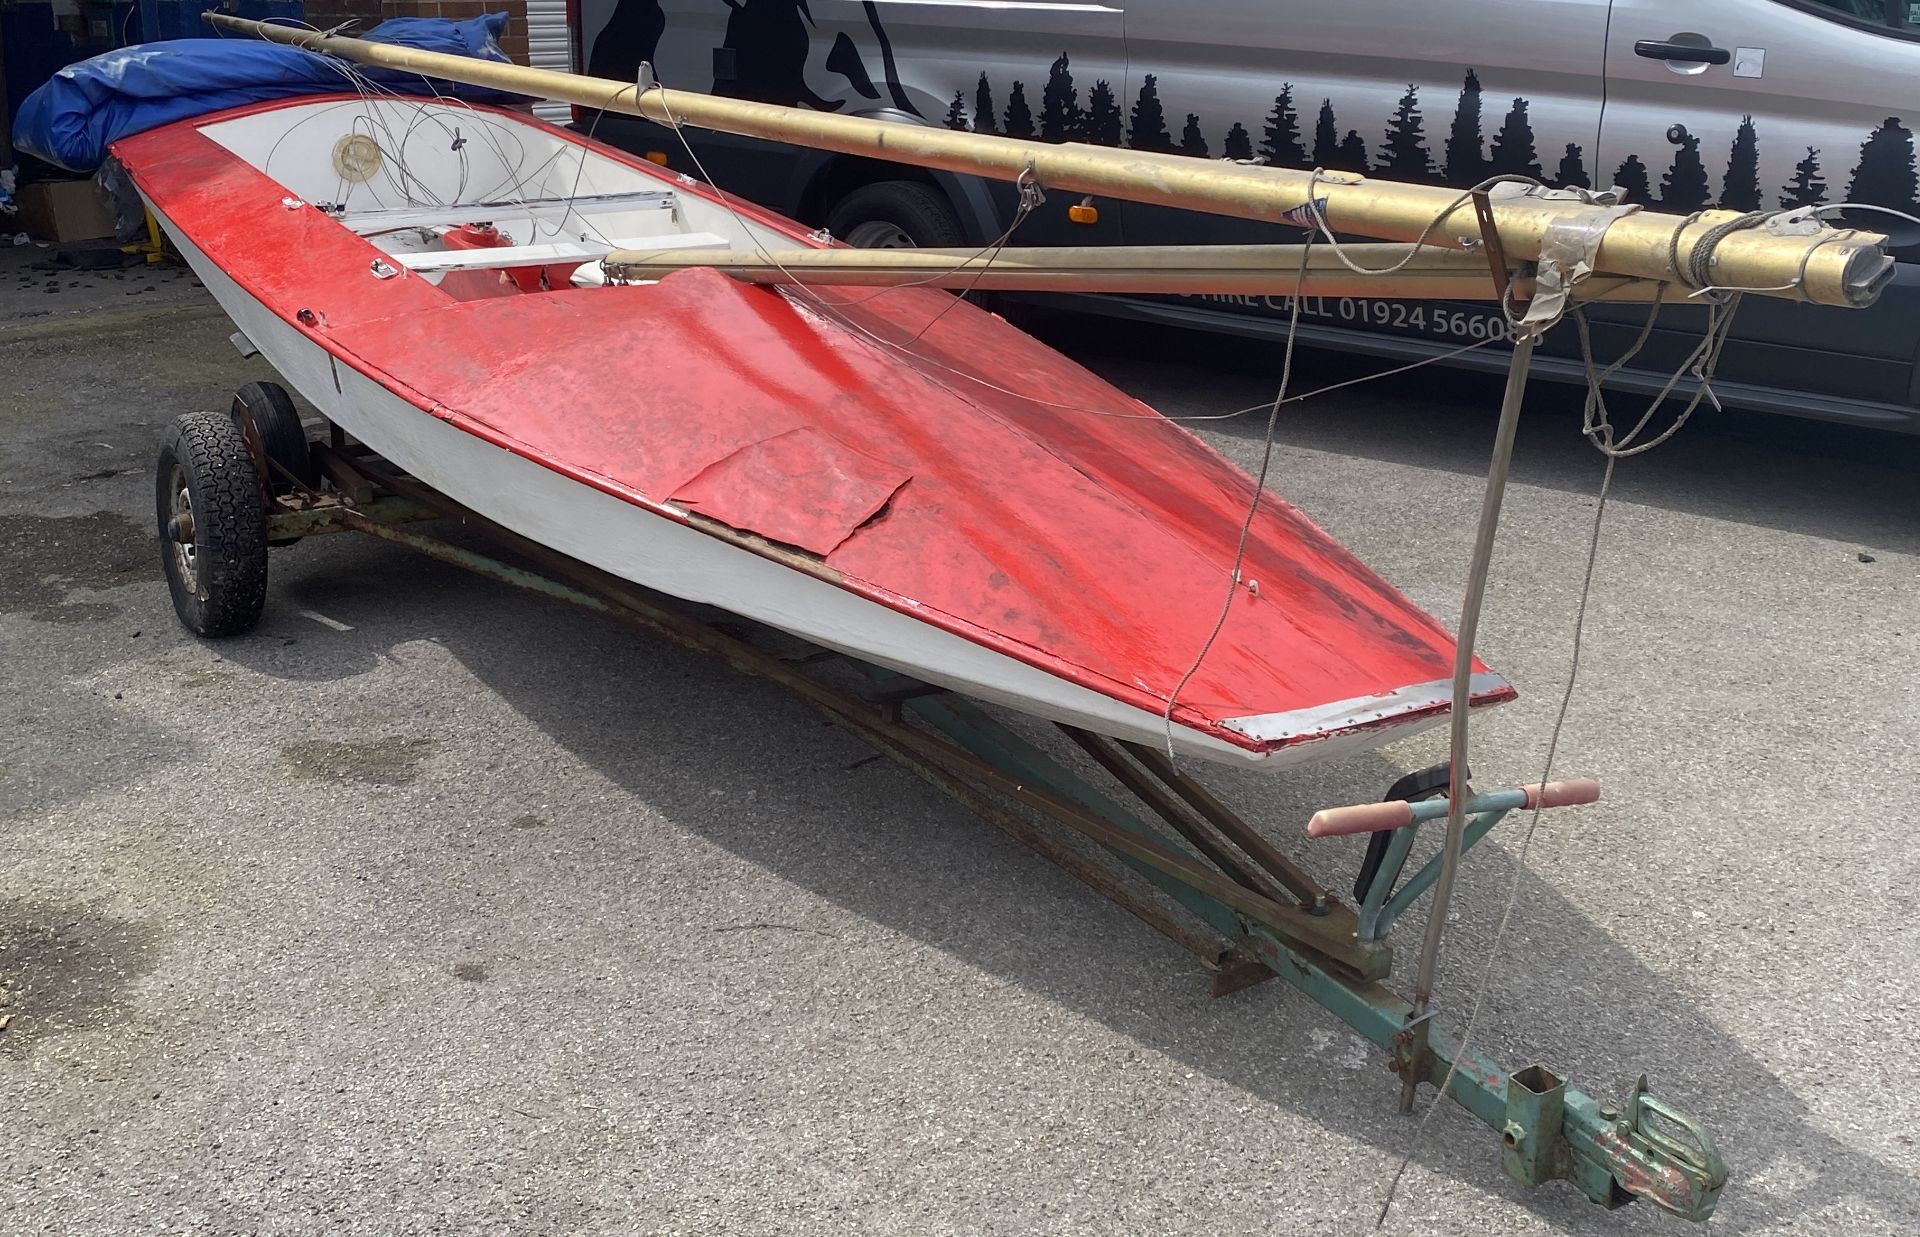 Red and white Fireball sailing boat with a 9' 9" (297cm) mast. - Image 2 of 24